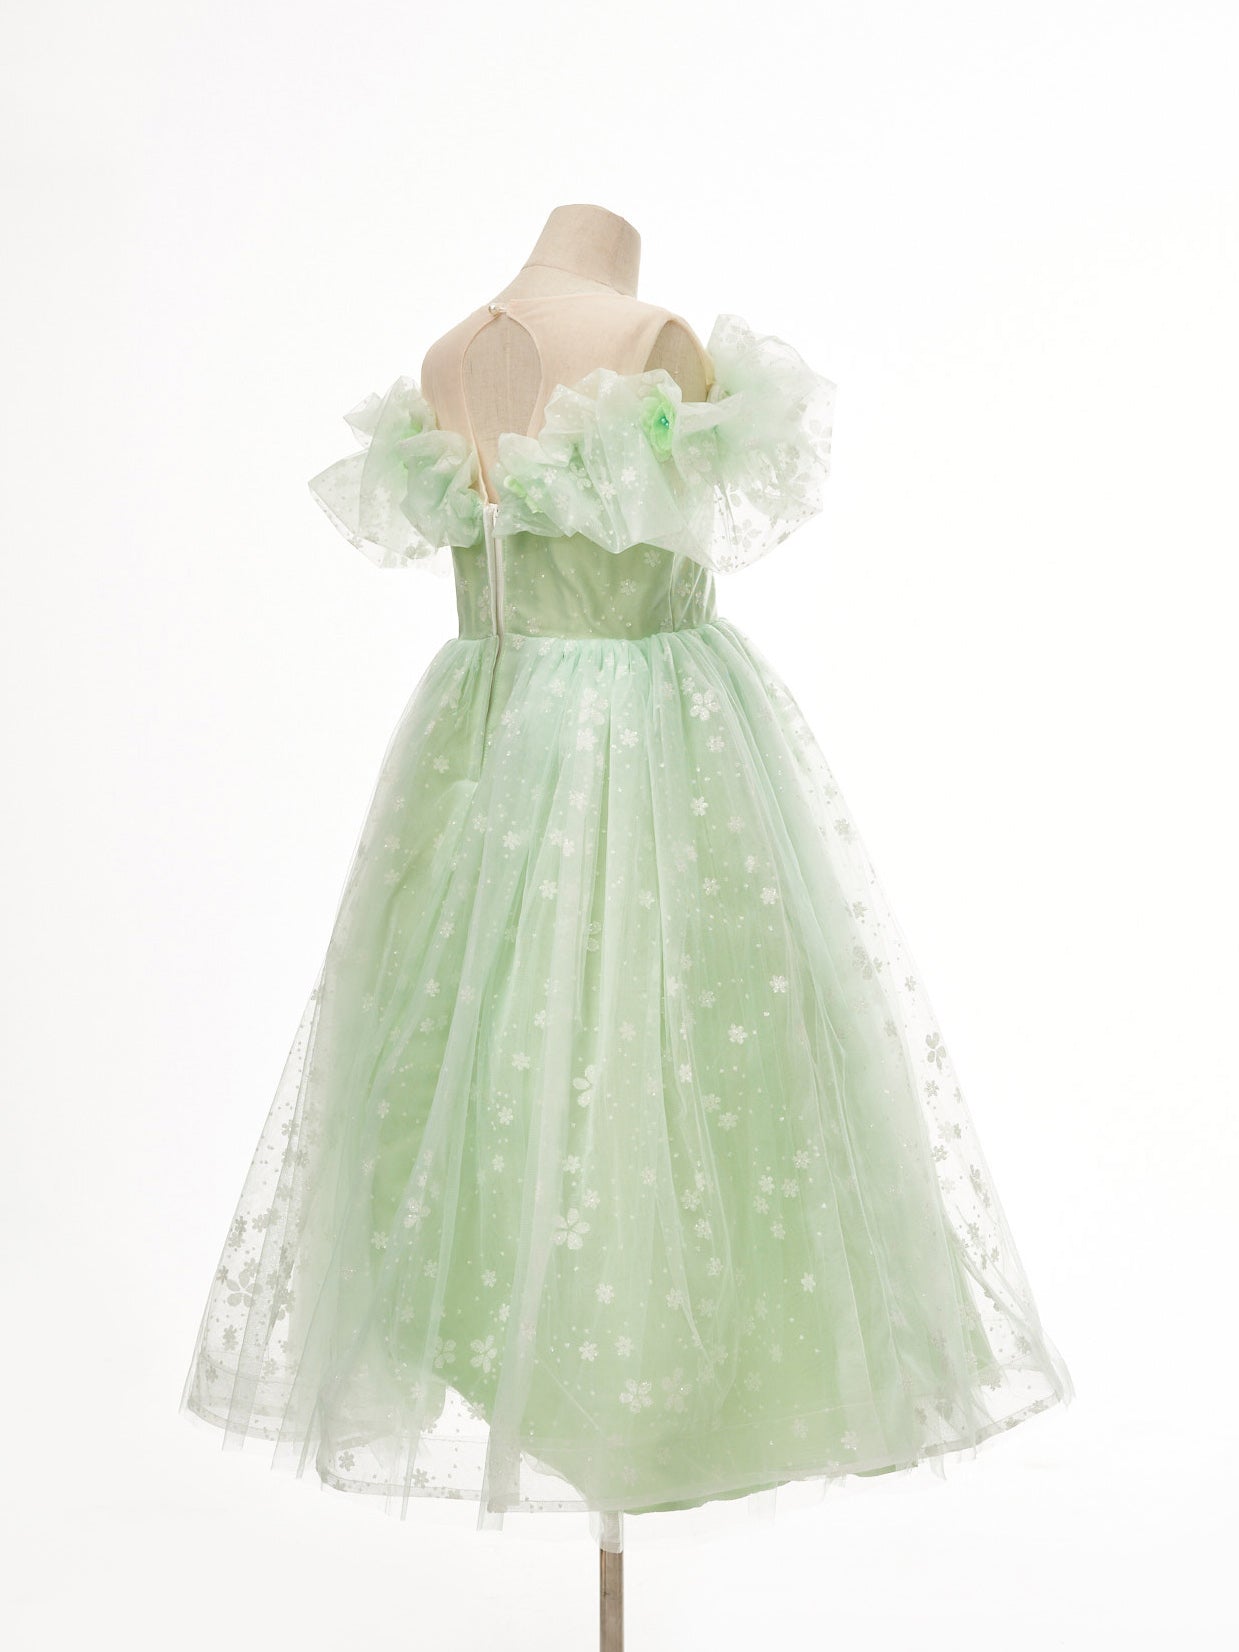 Kate Light Green Tulle Princess Kids Dress for Photography